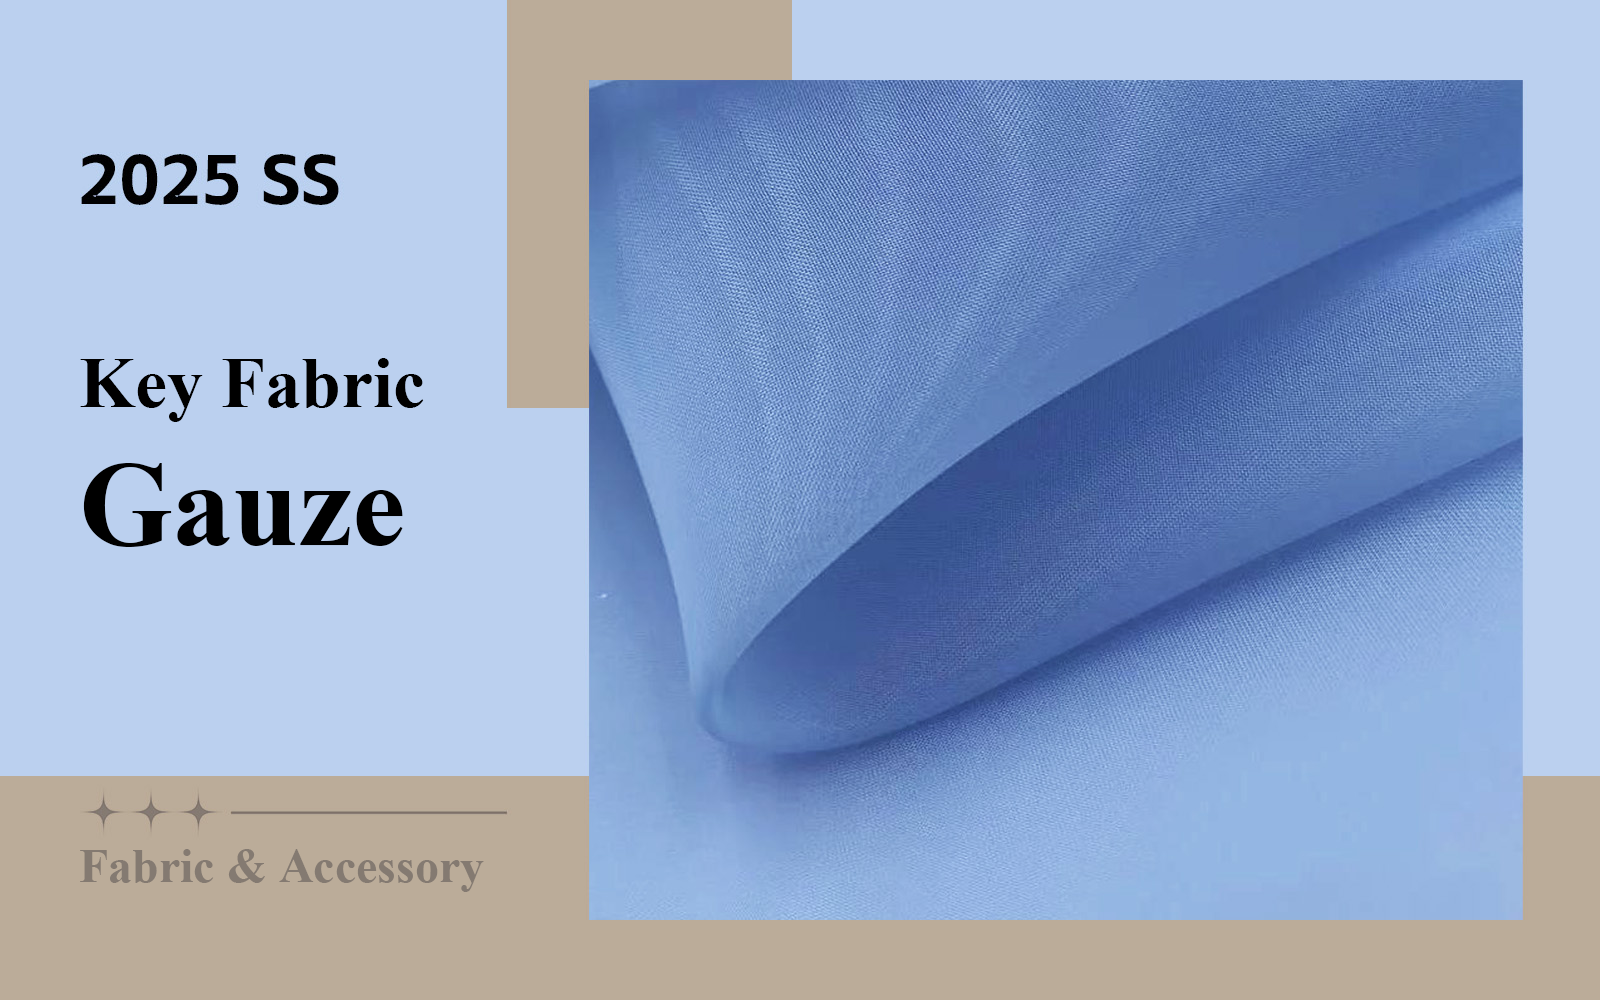 The Fabric Trend of Gauze